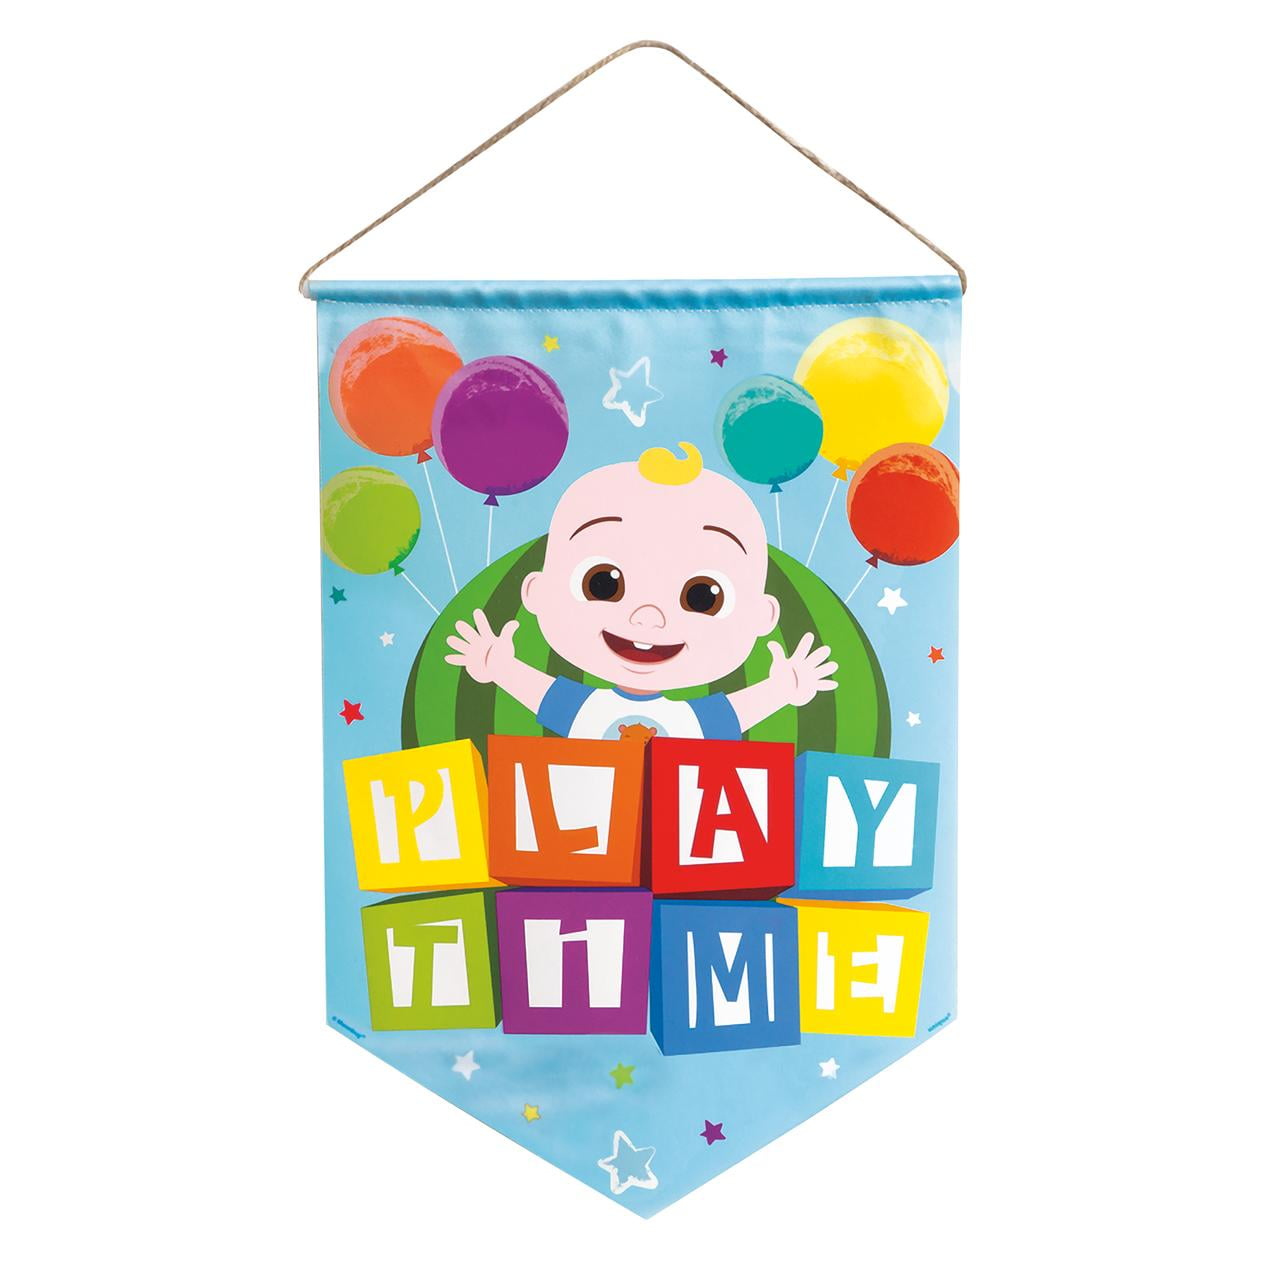 Cocomelon Fabric Pennant Banner, 12.75in